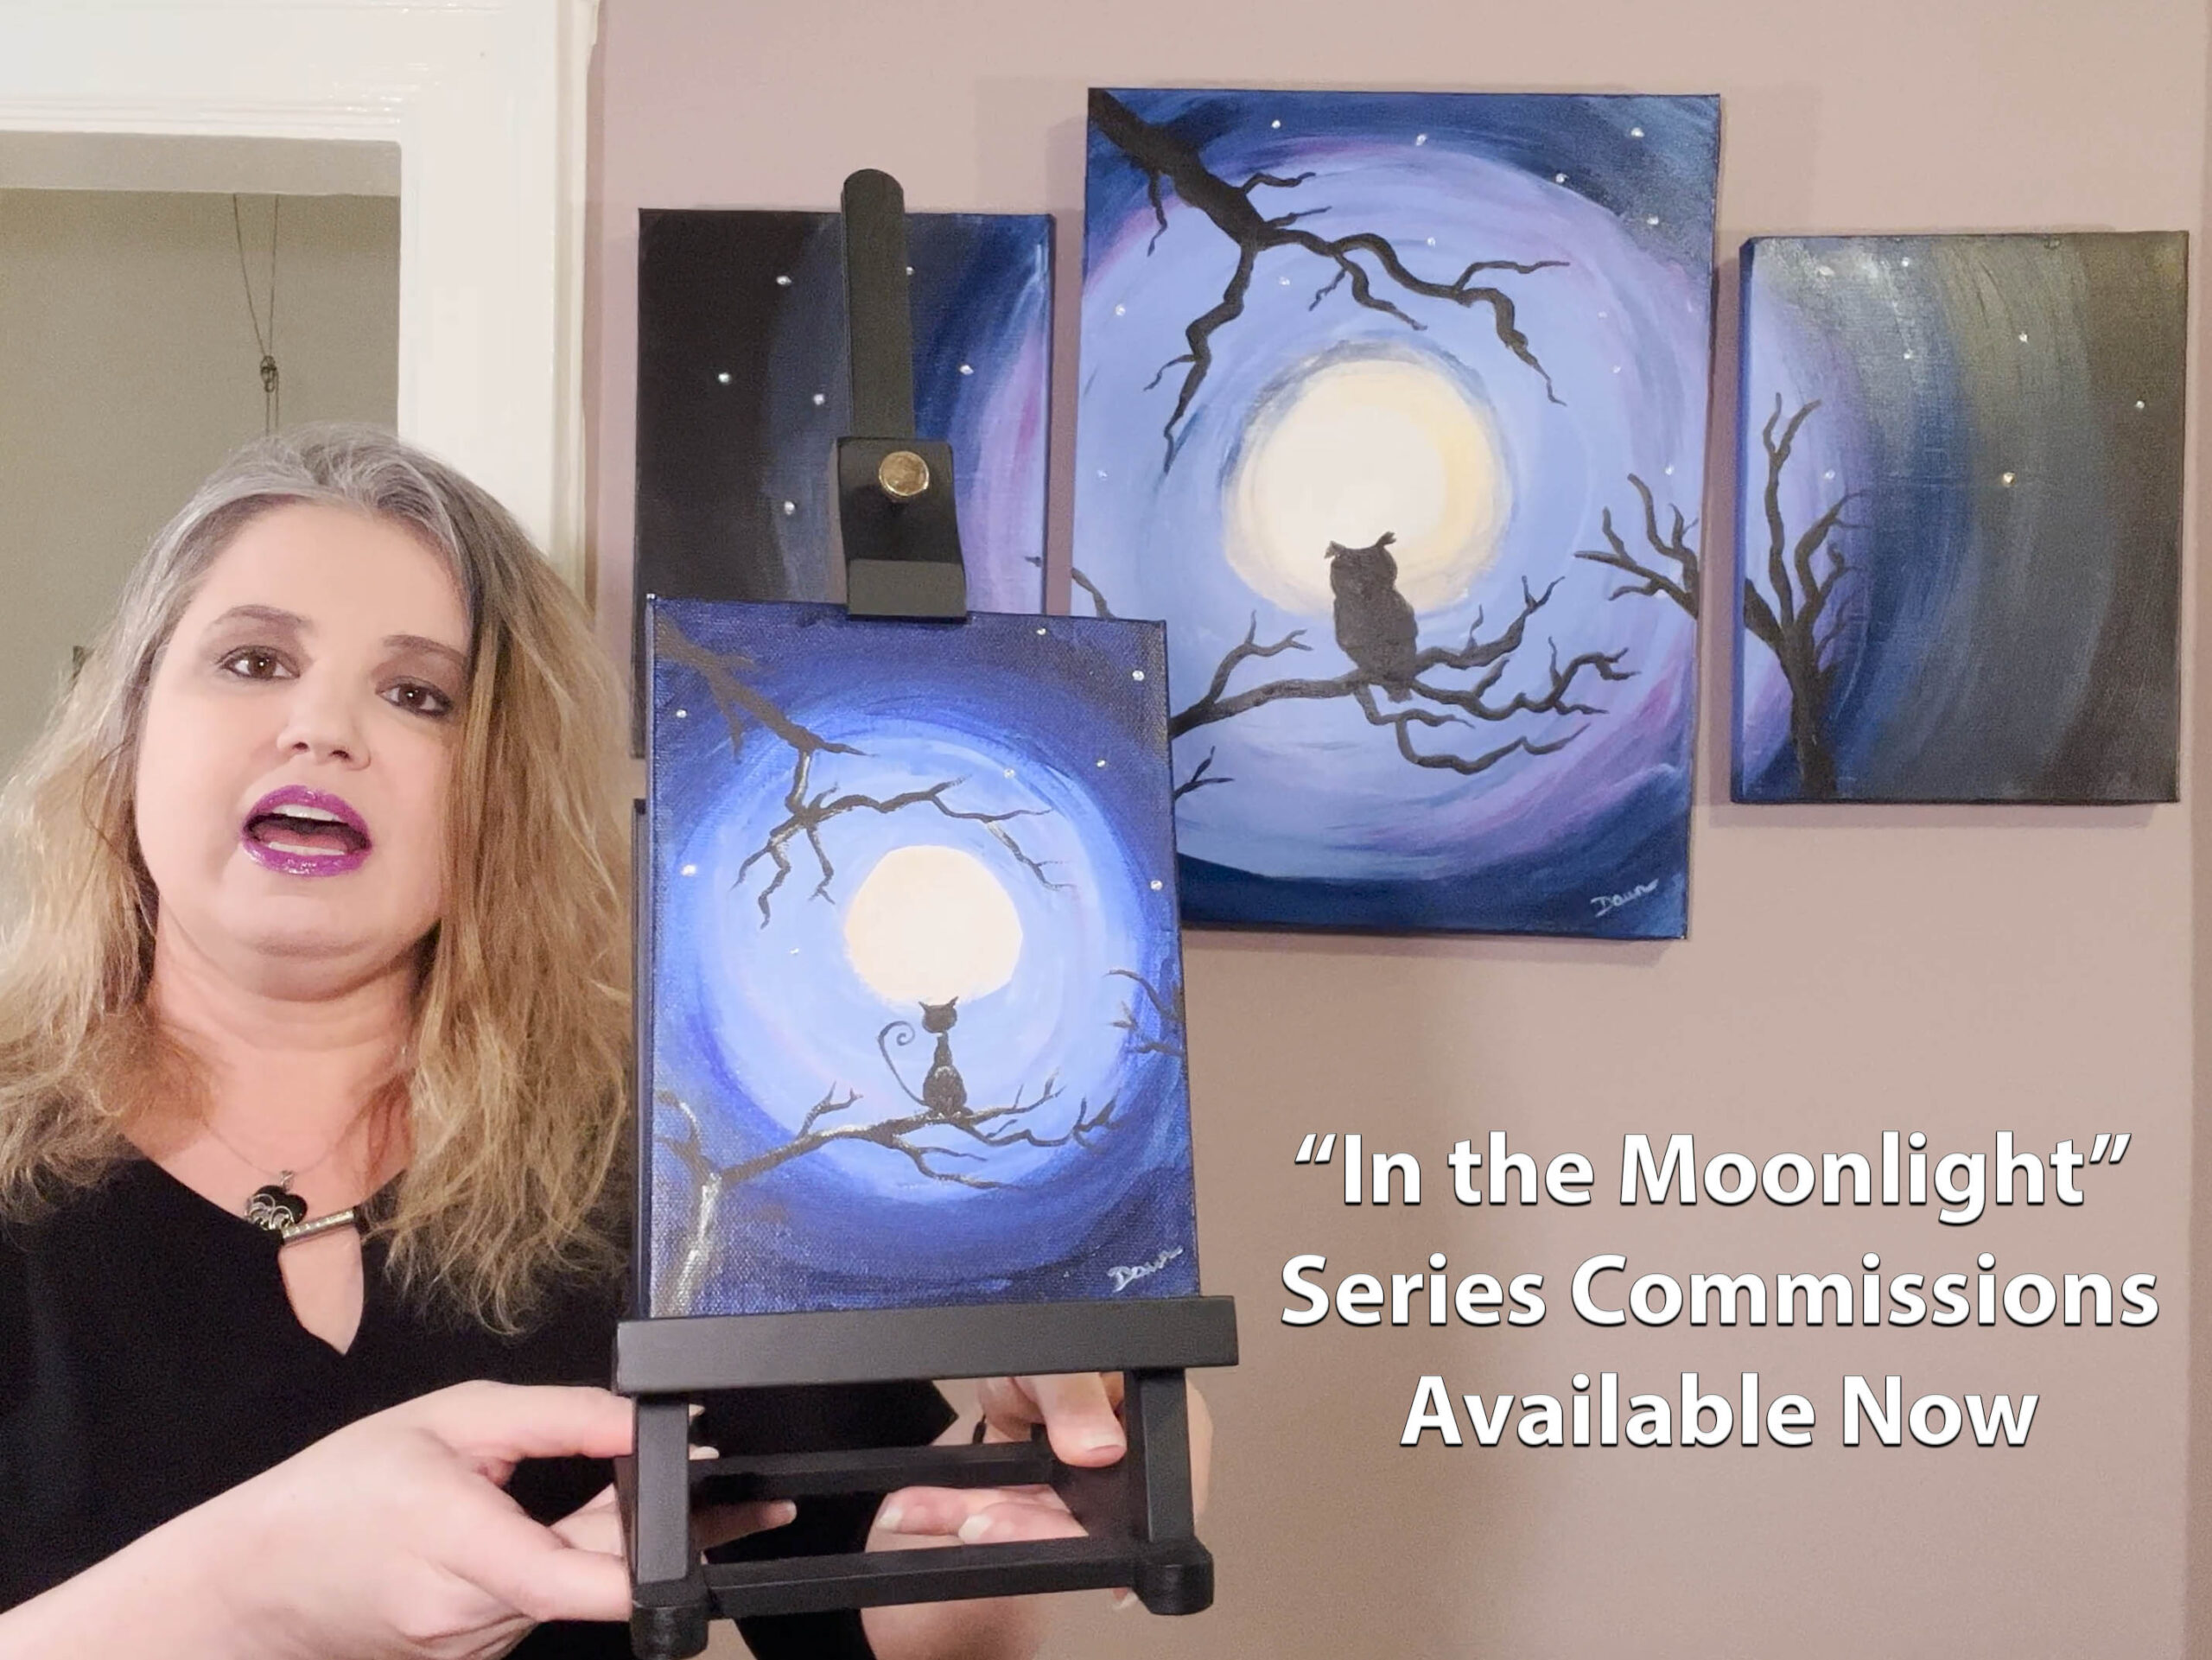 Commission an “In the Moonlight” Artwork